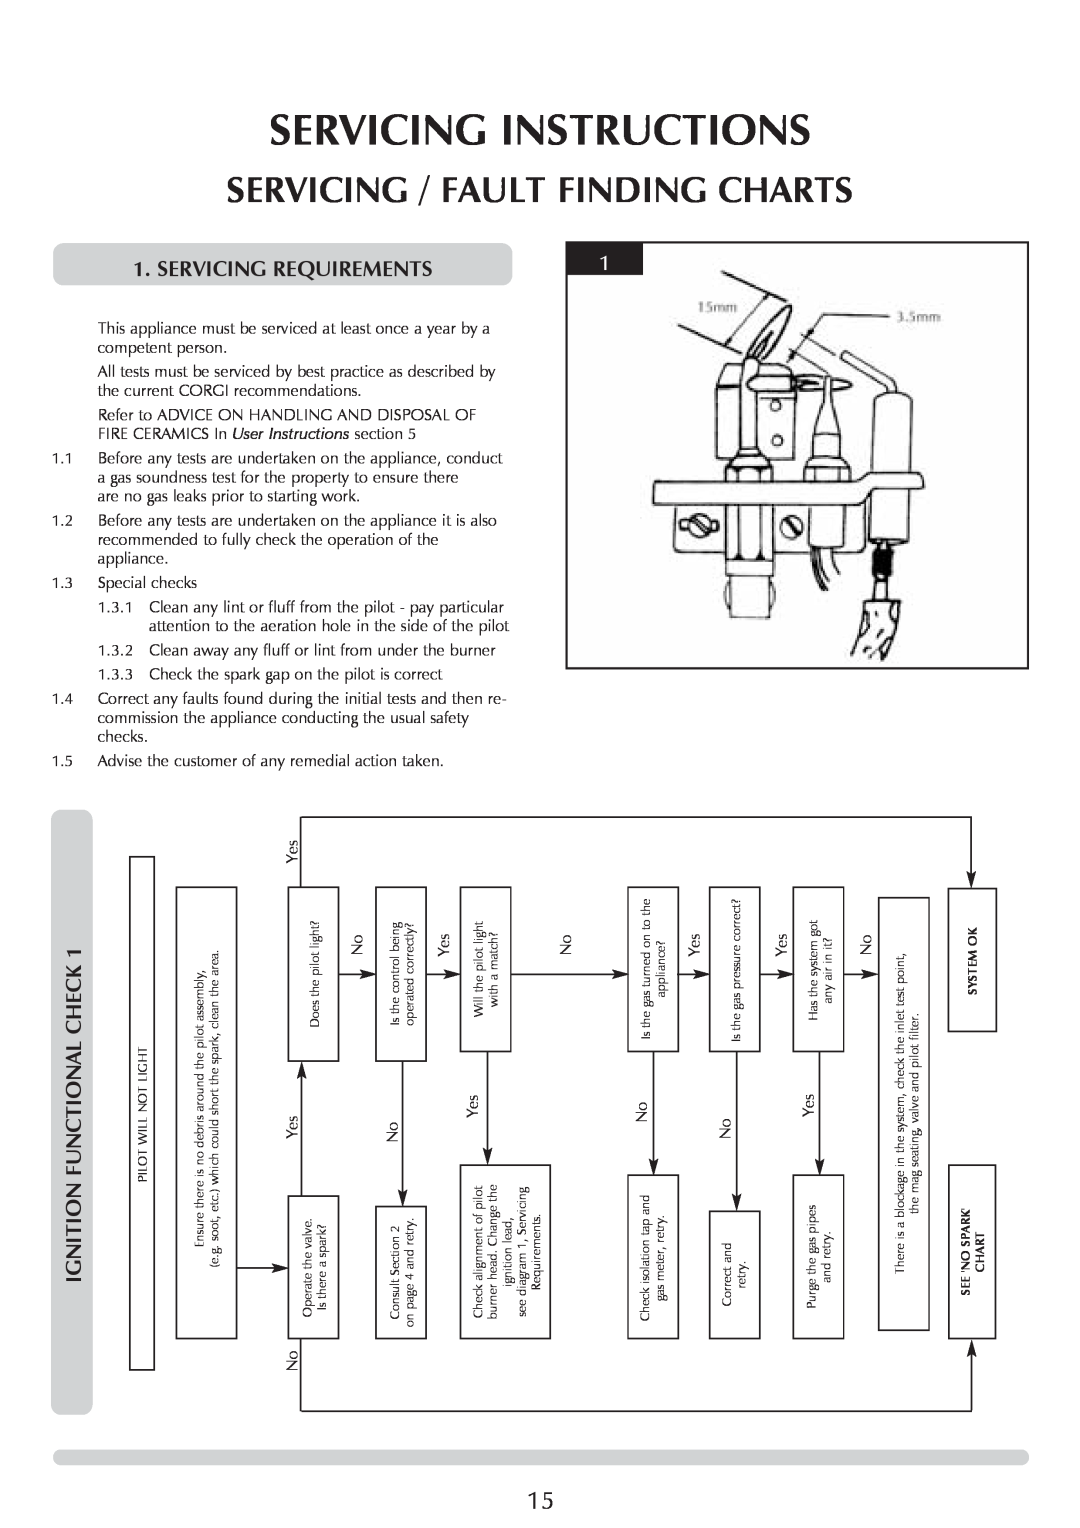 Stovax AR0887, Steel Manhattan AR0365 Servicing Instructions, Servicing / Fault Finding Charts, Servicing Requirements 